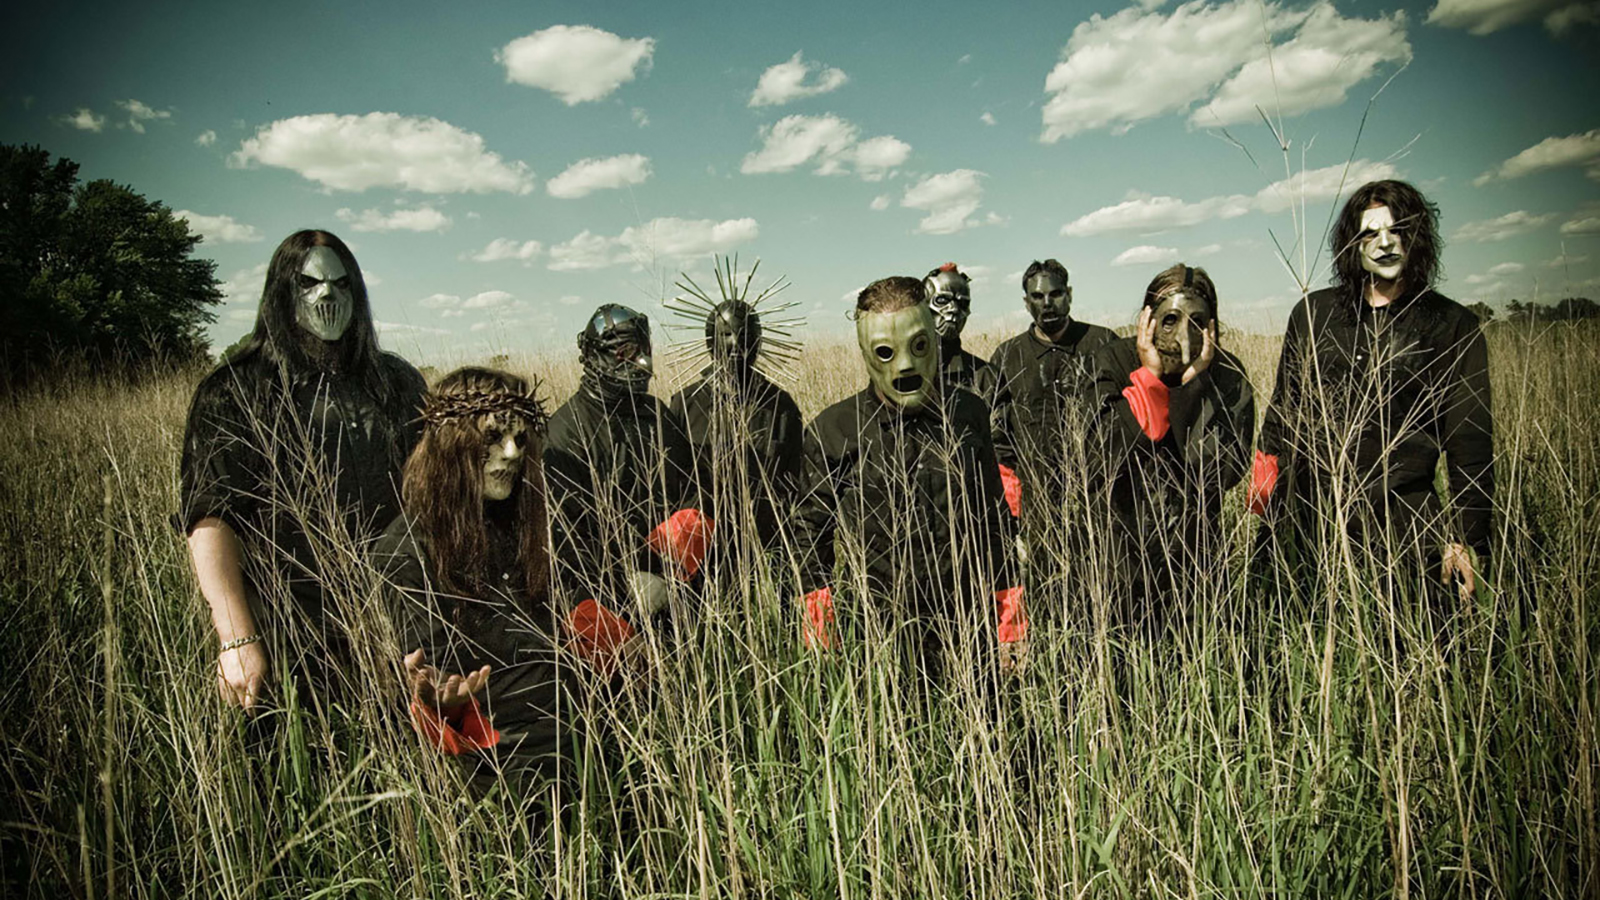 Slipknot's 'All Hope Is Gone': 6 Things You Didn't Know About Landmark 2008 Album